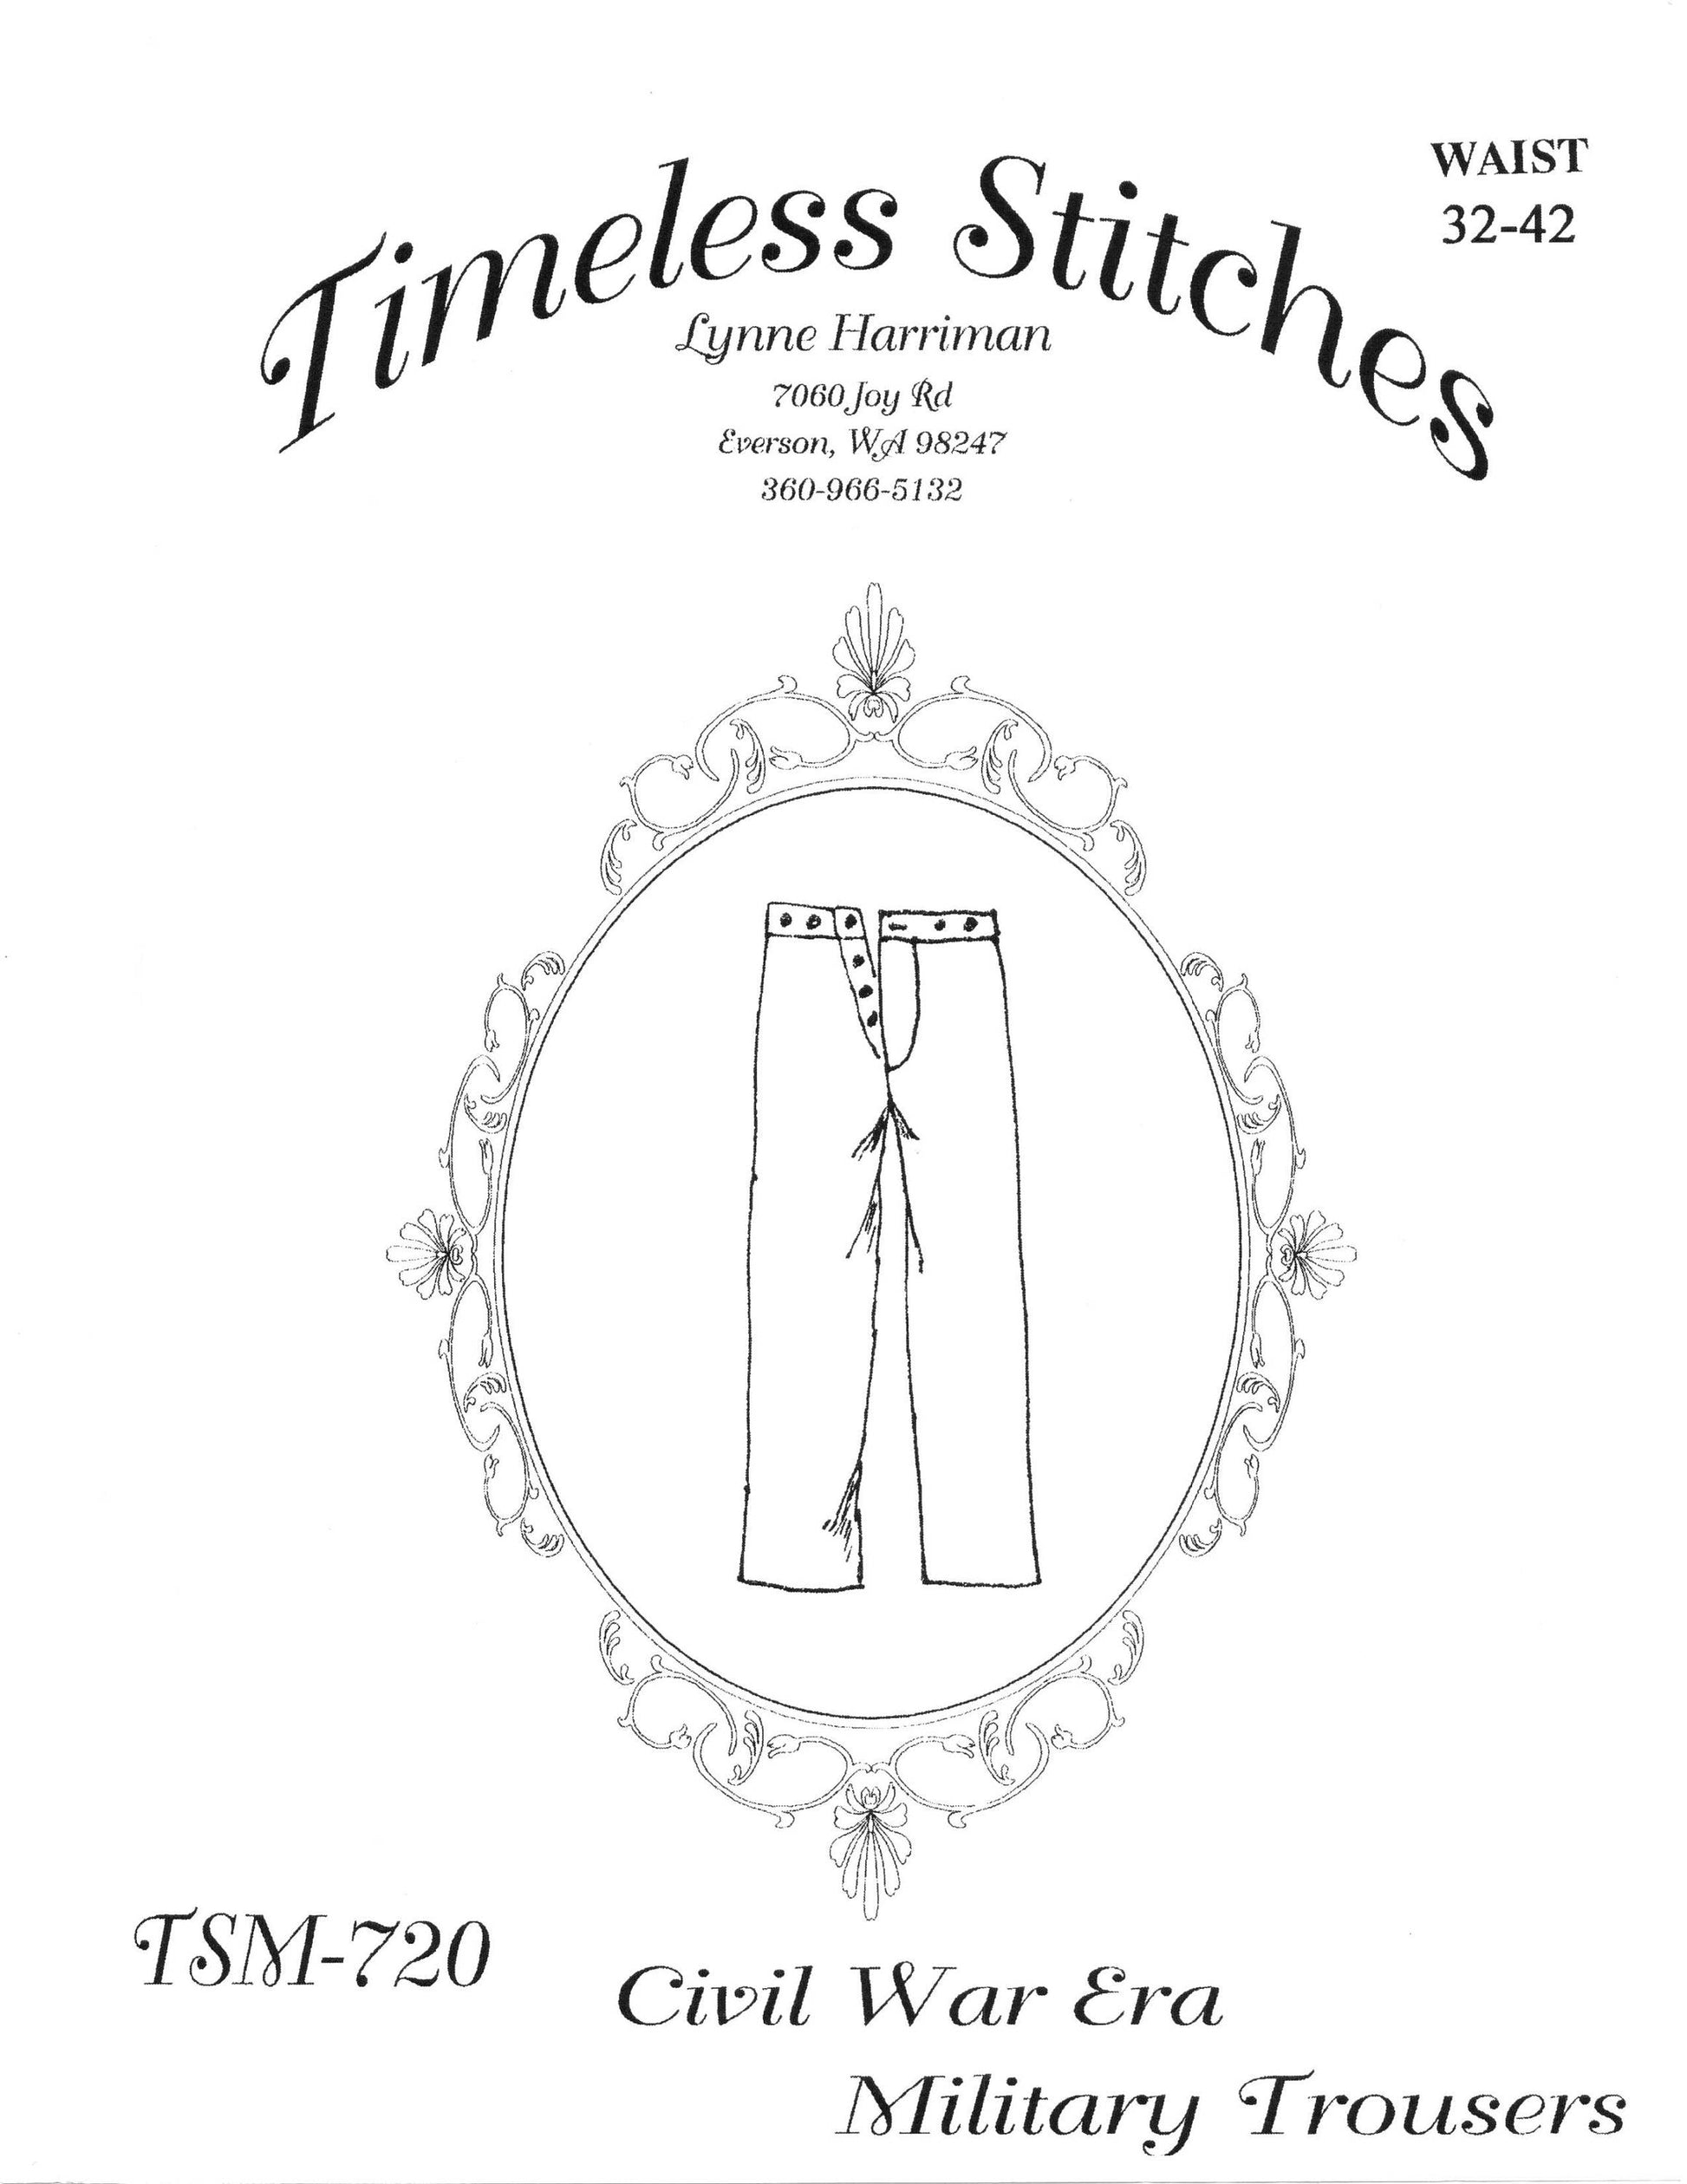 Military Trousers/ Civil War Era Military Trouser Pattern Timeless Stitches Sewing Pattern TSM-720 Military Trousers